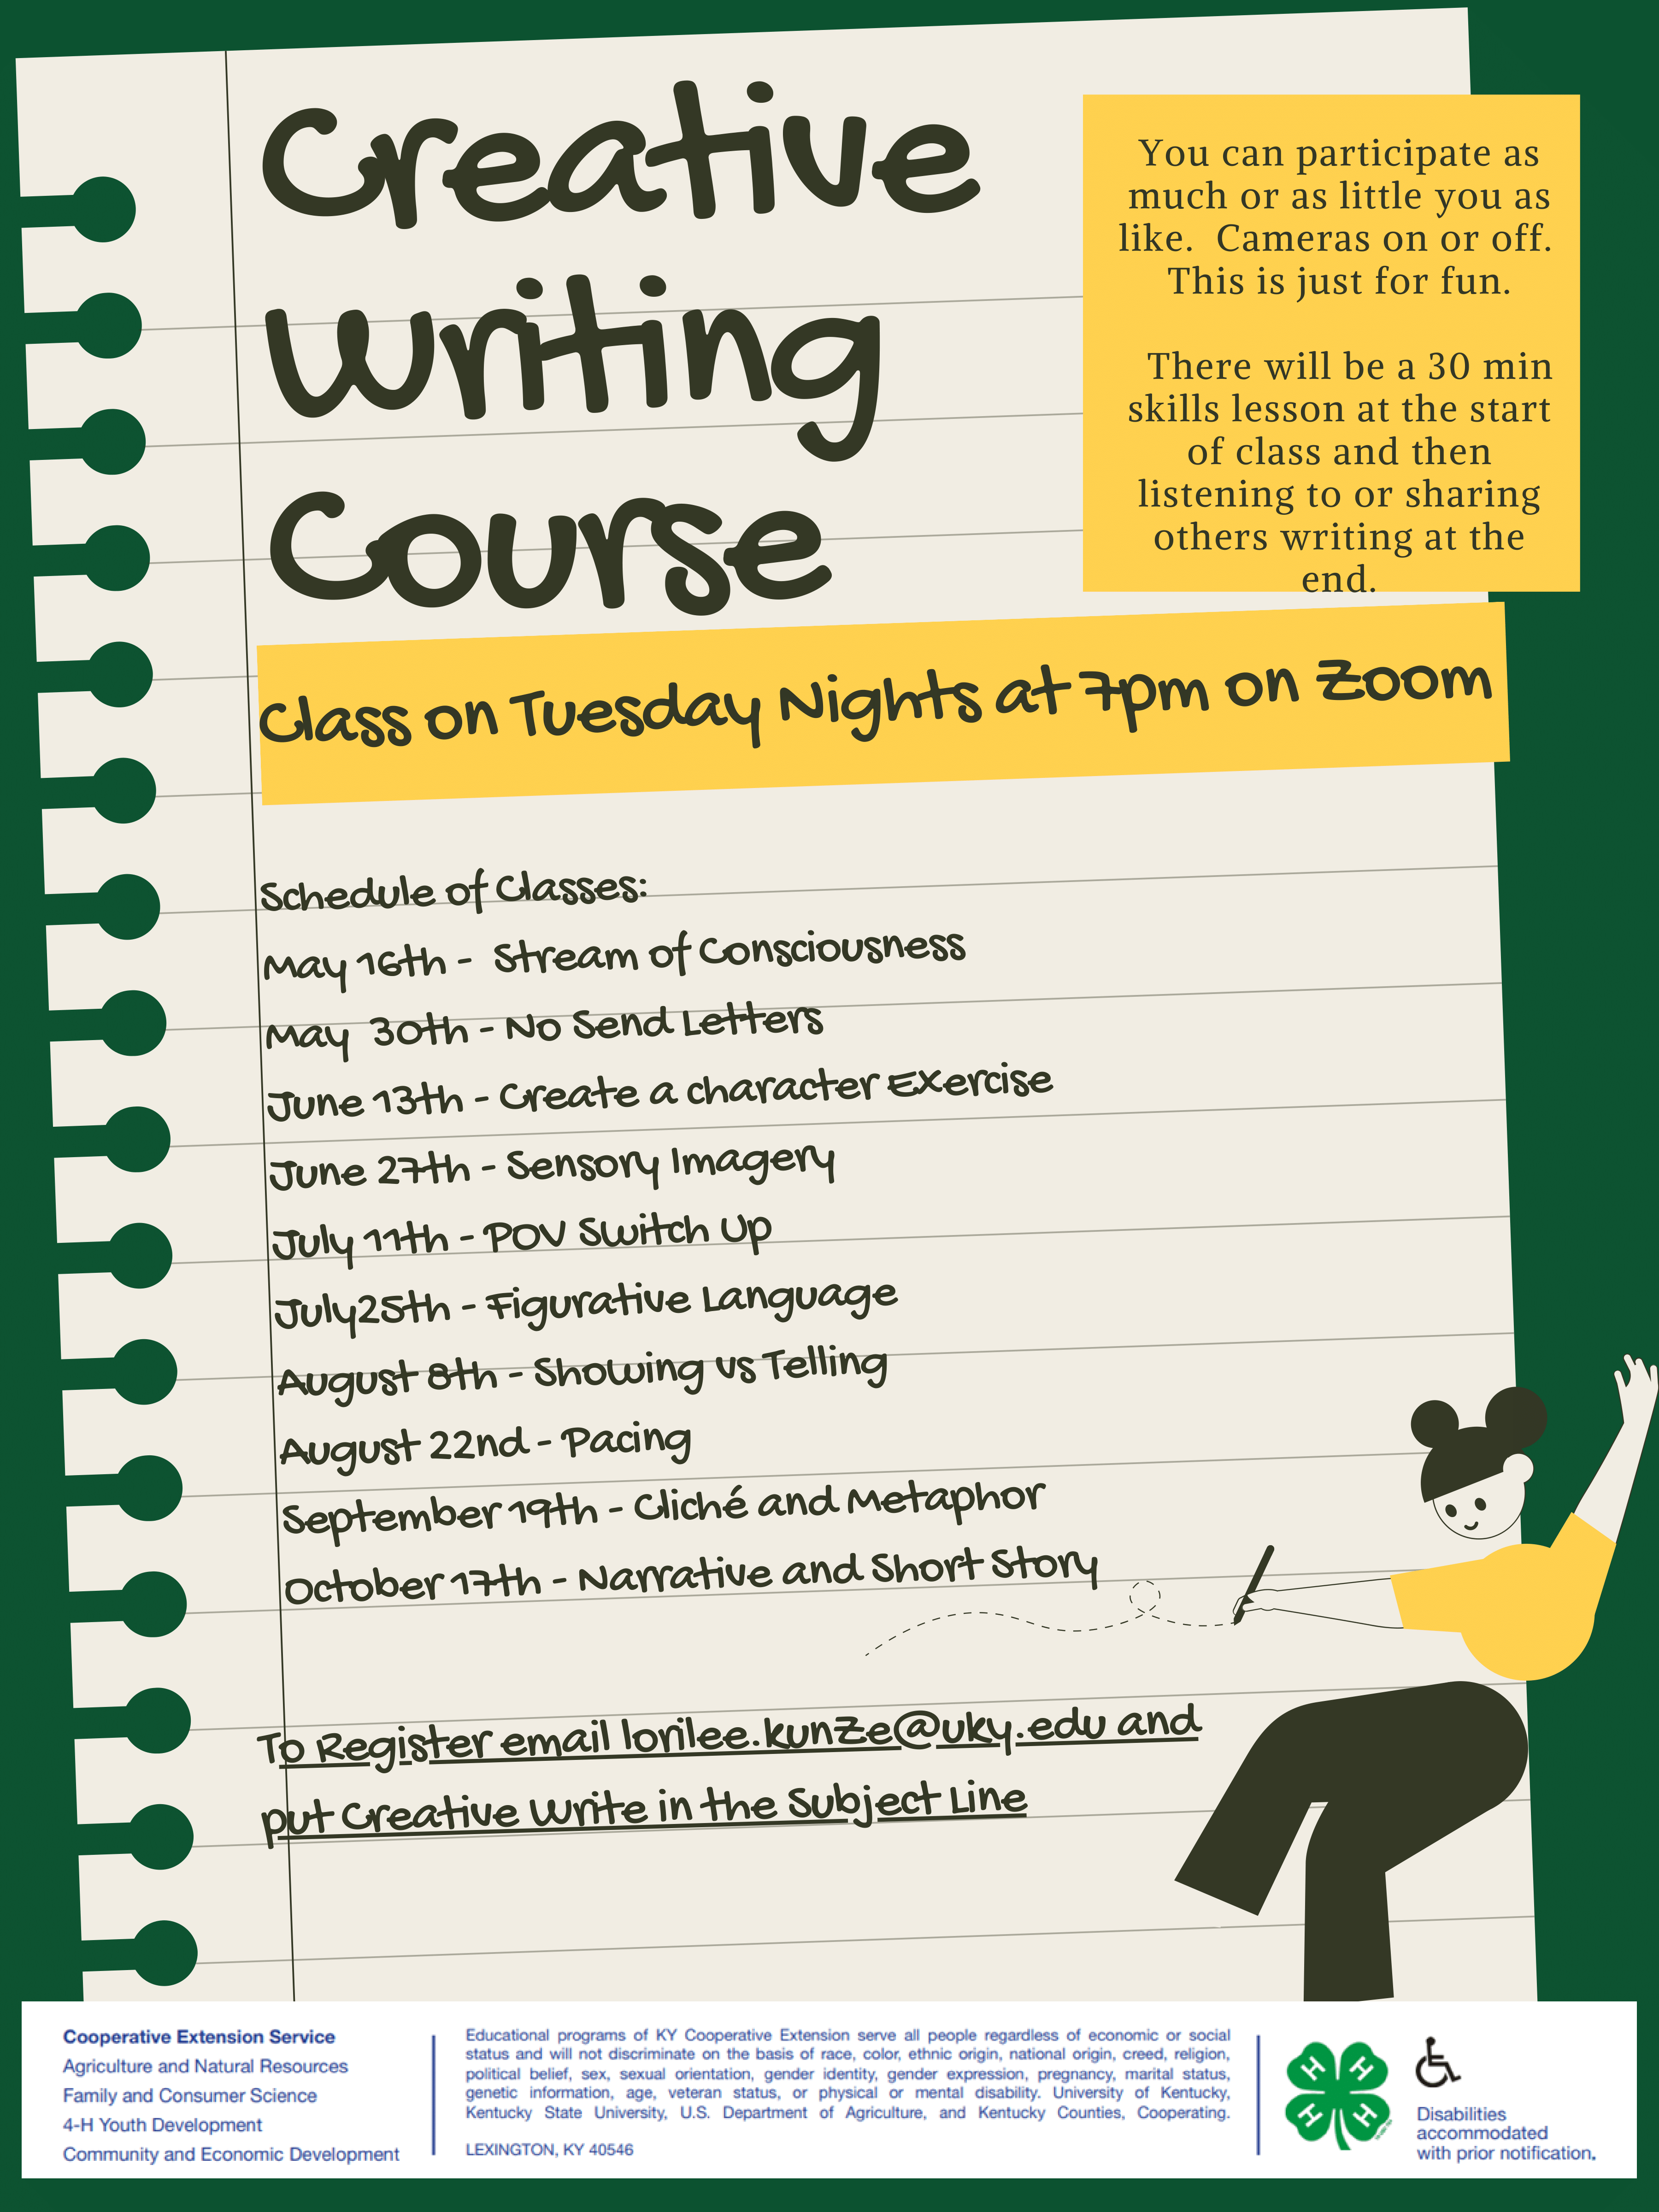 Creative Writing Course Schedule 